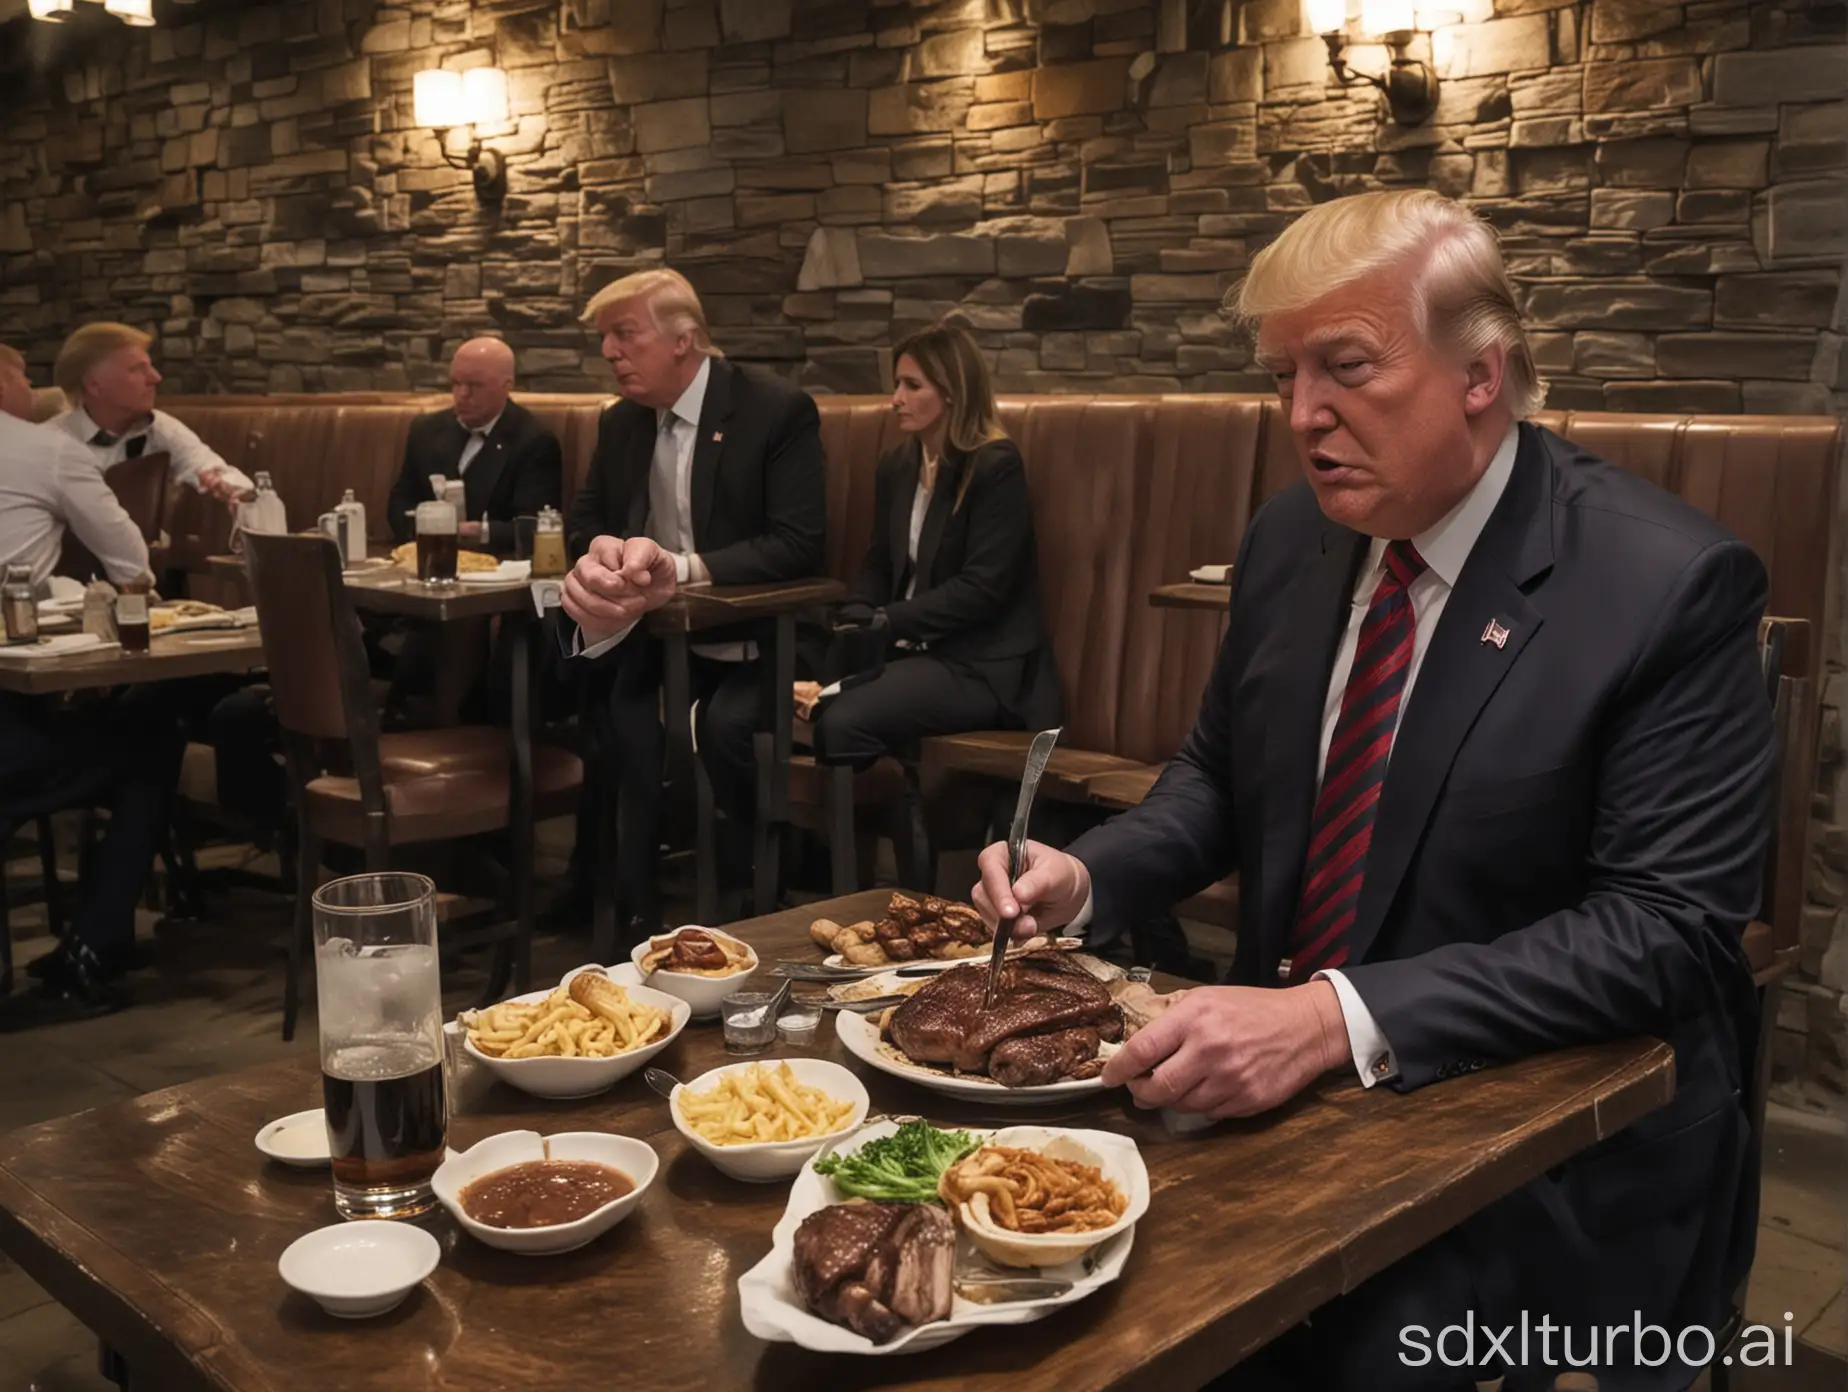 Solitary-Dining-Trump-Enjoying-Barbecue-in-an-Empty-Restaurant